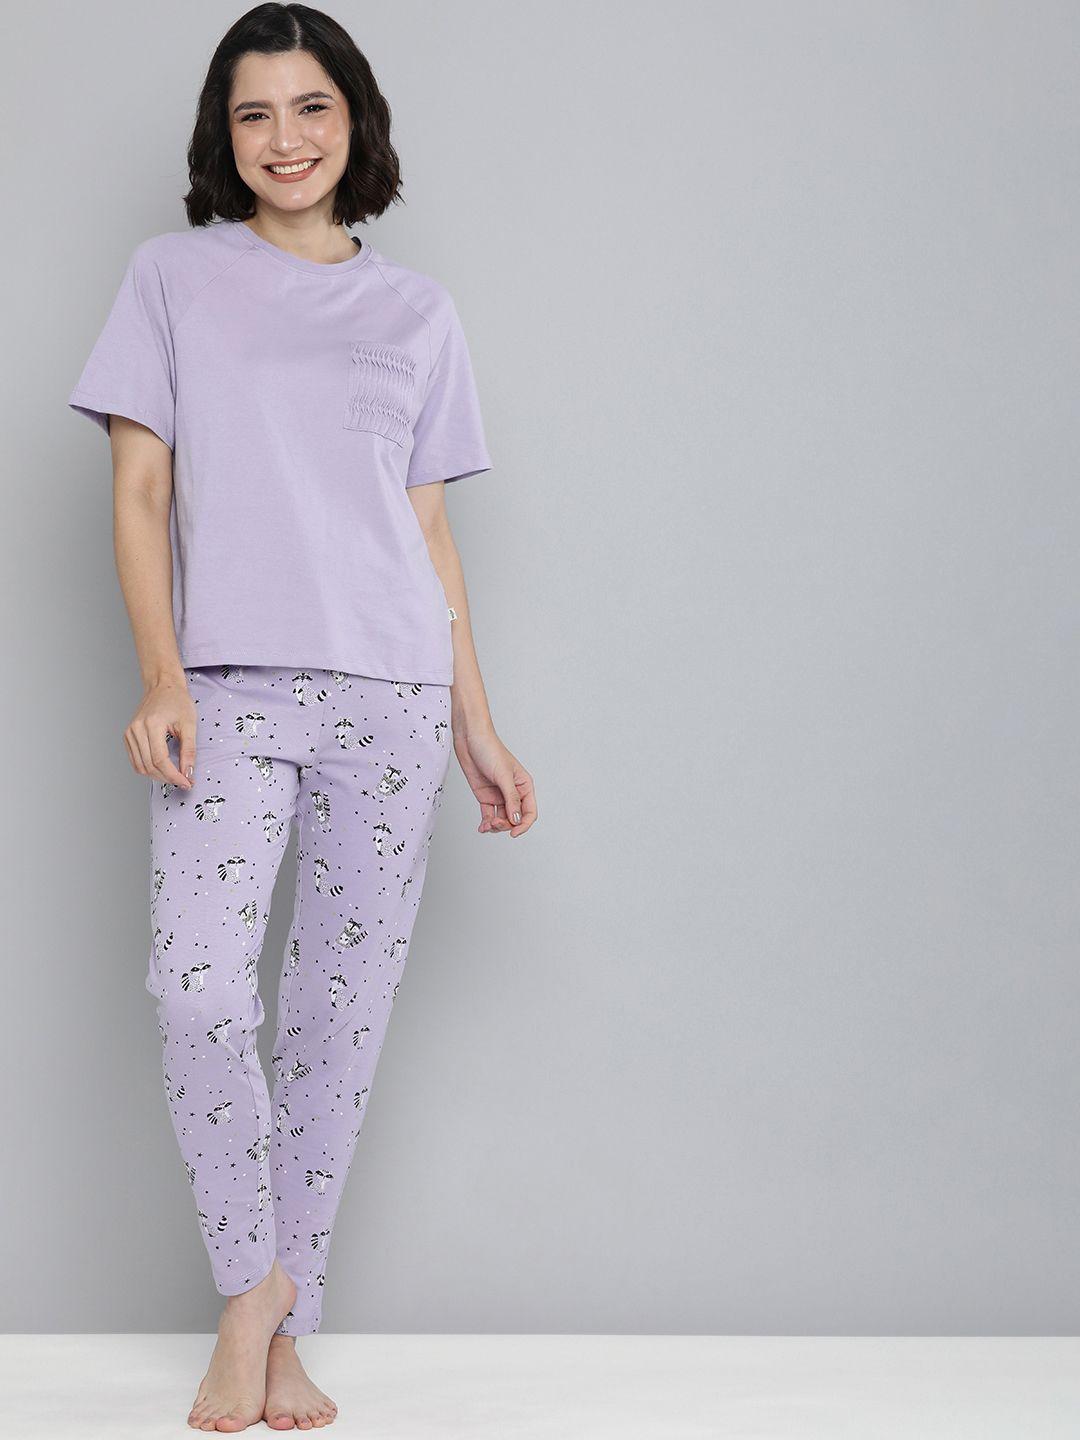 here&now-women-lilac-conversational-printed-mid-rise-pure-cotton-casual-lounge-pants